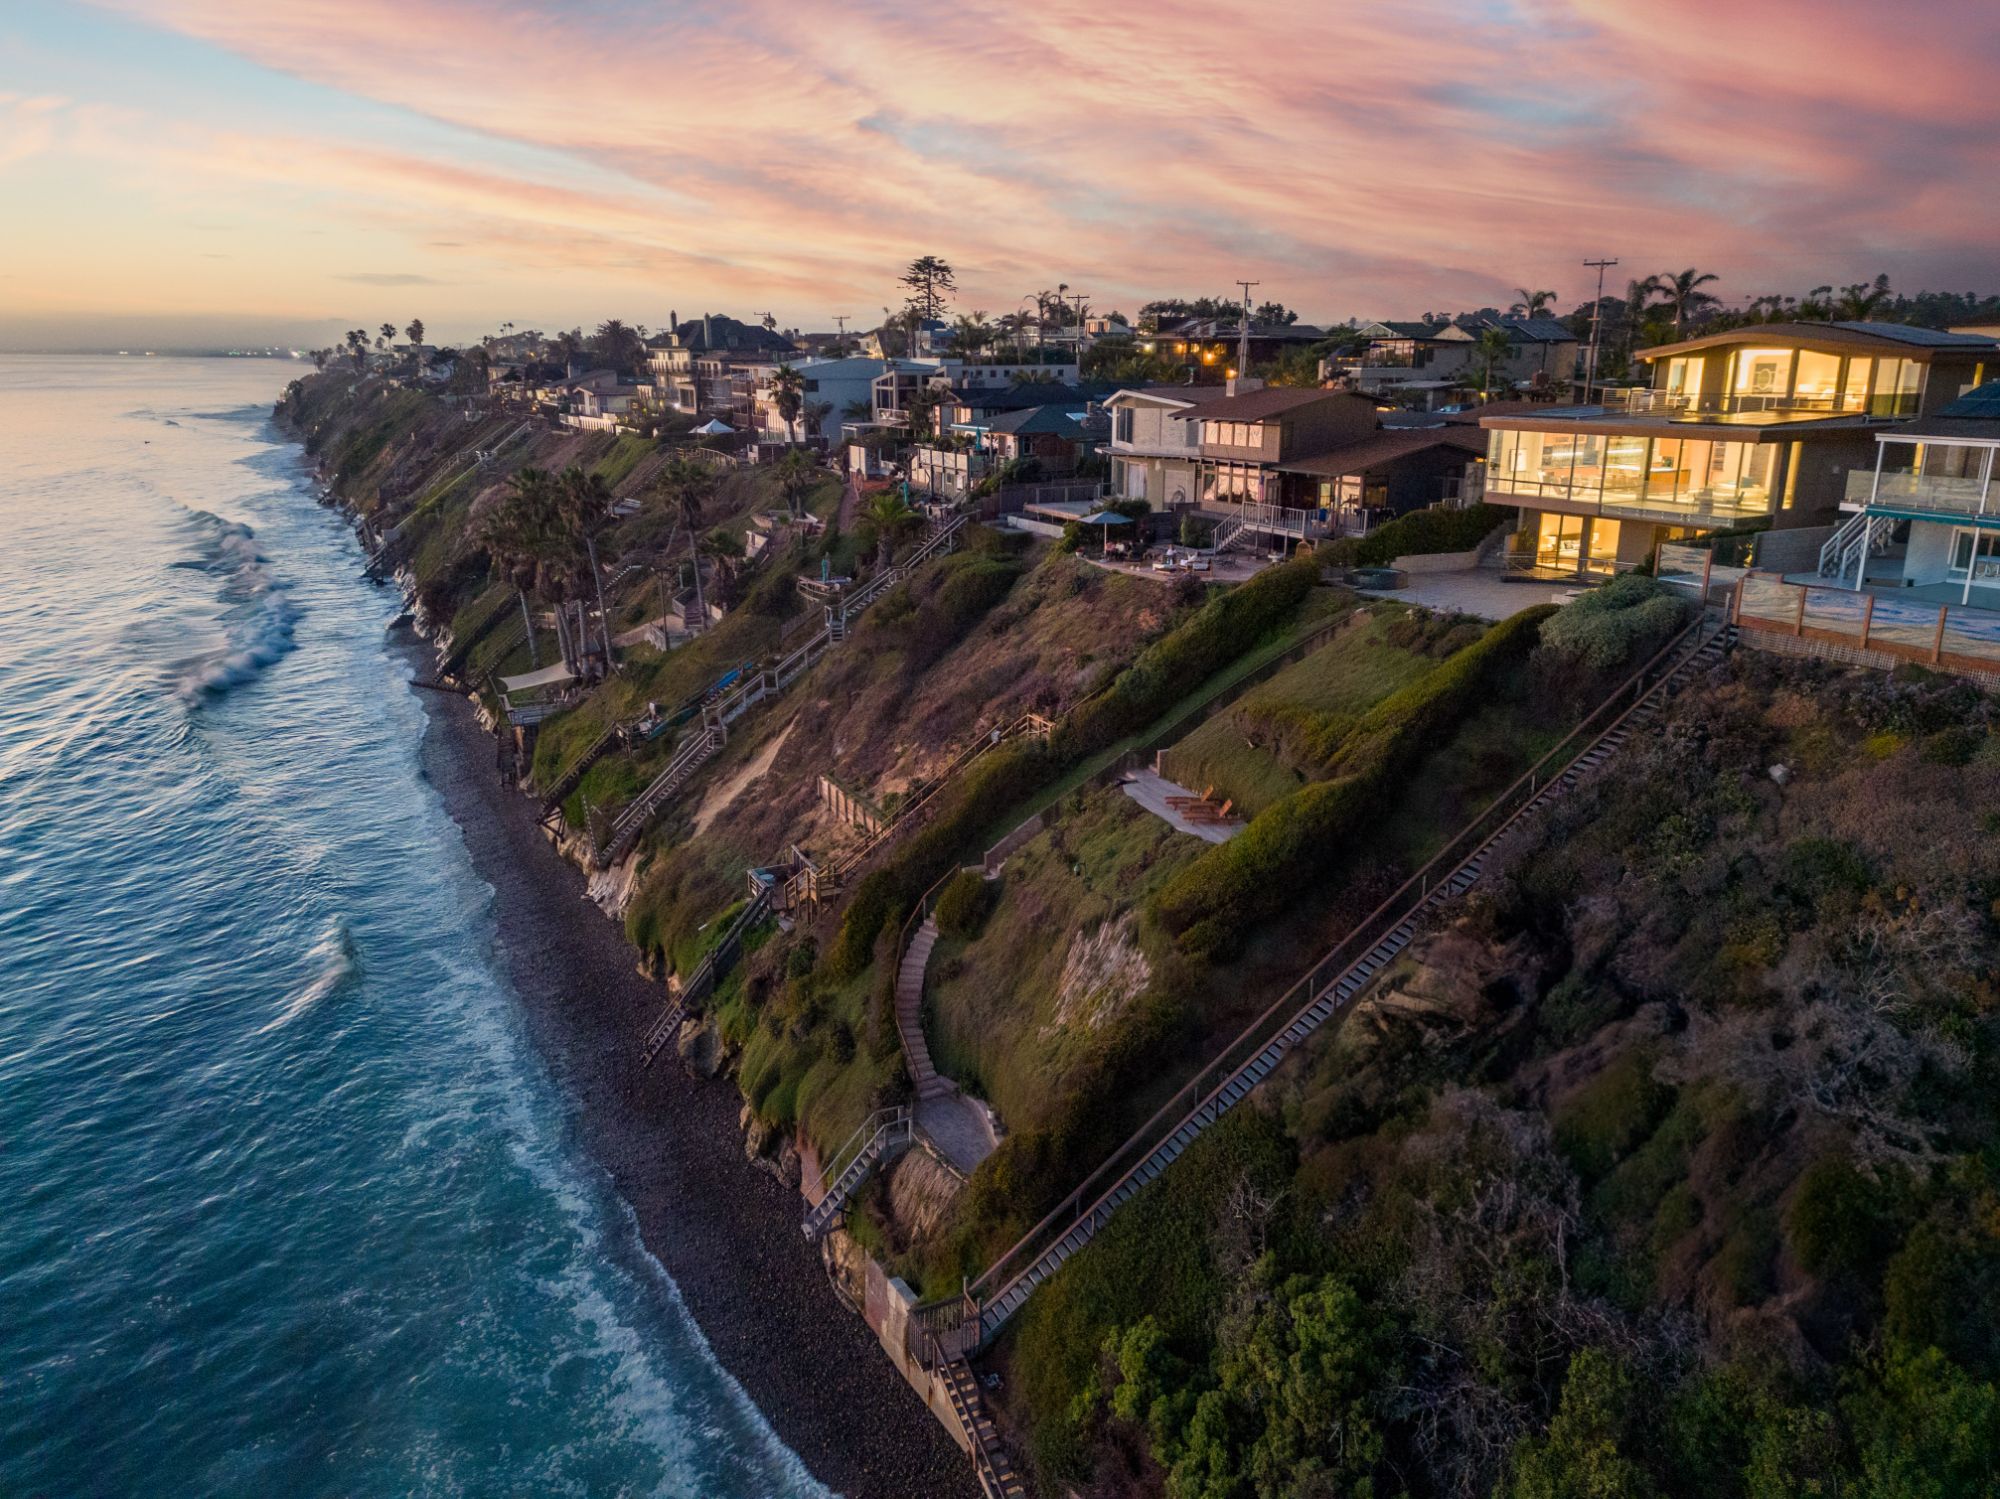 In Encinitas, a $28.75 Million Spec Home Looks to Blow Previous Price Record Out of the Water